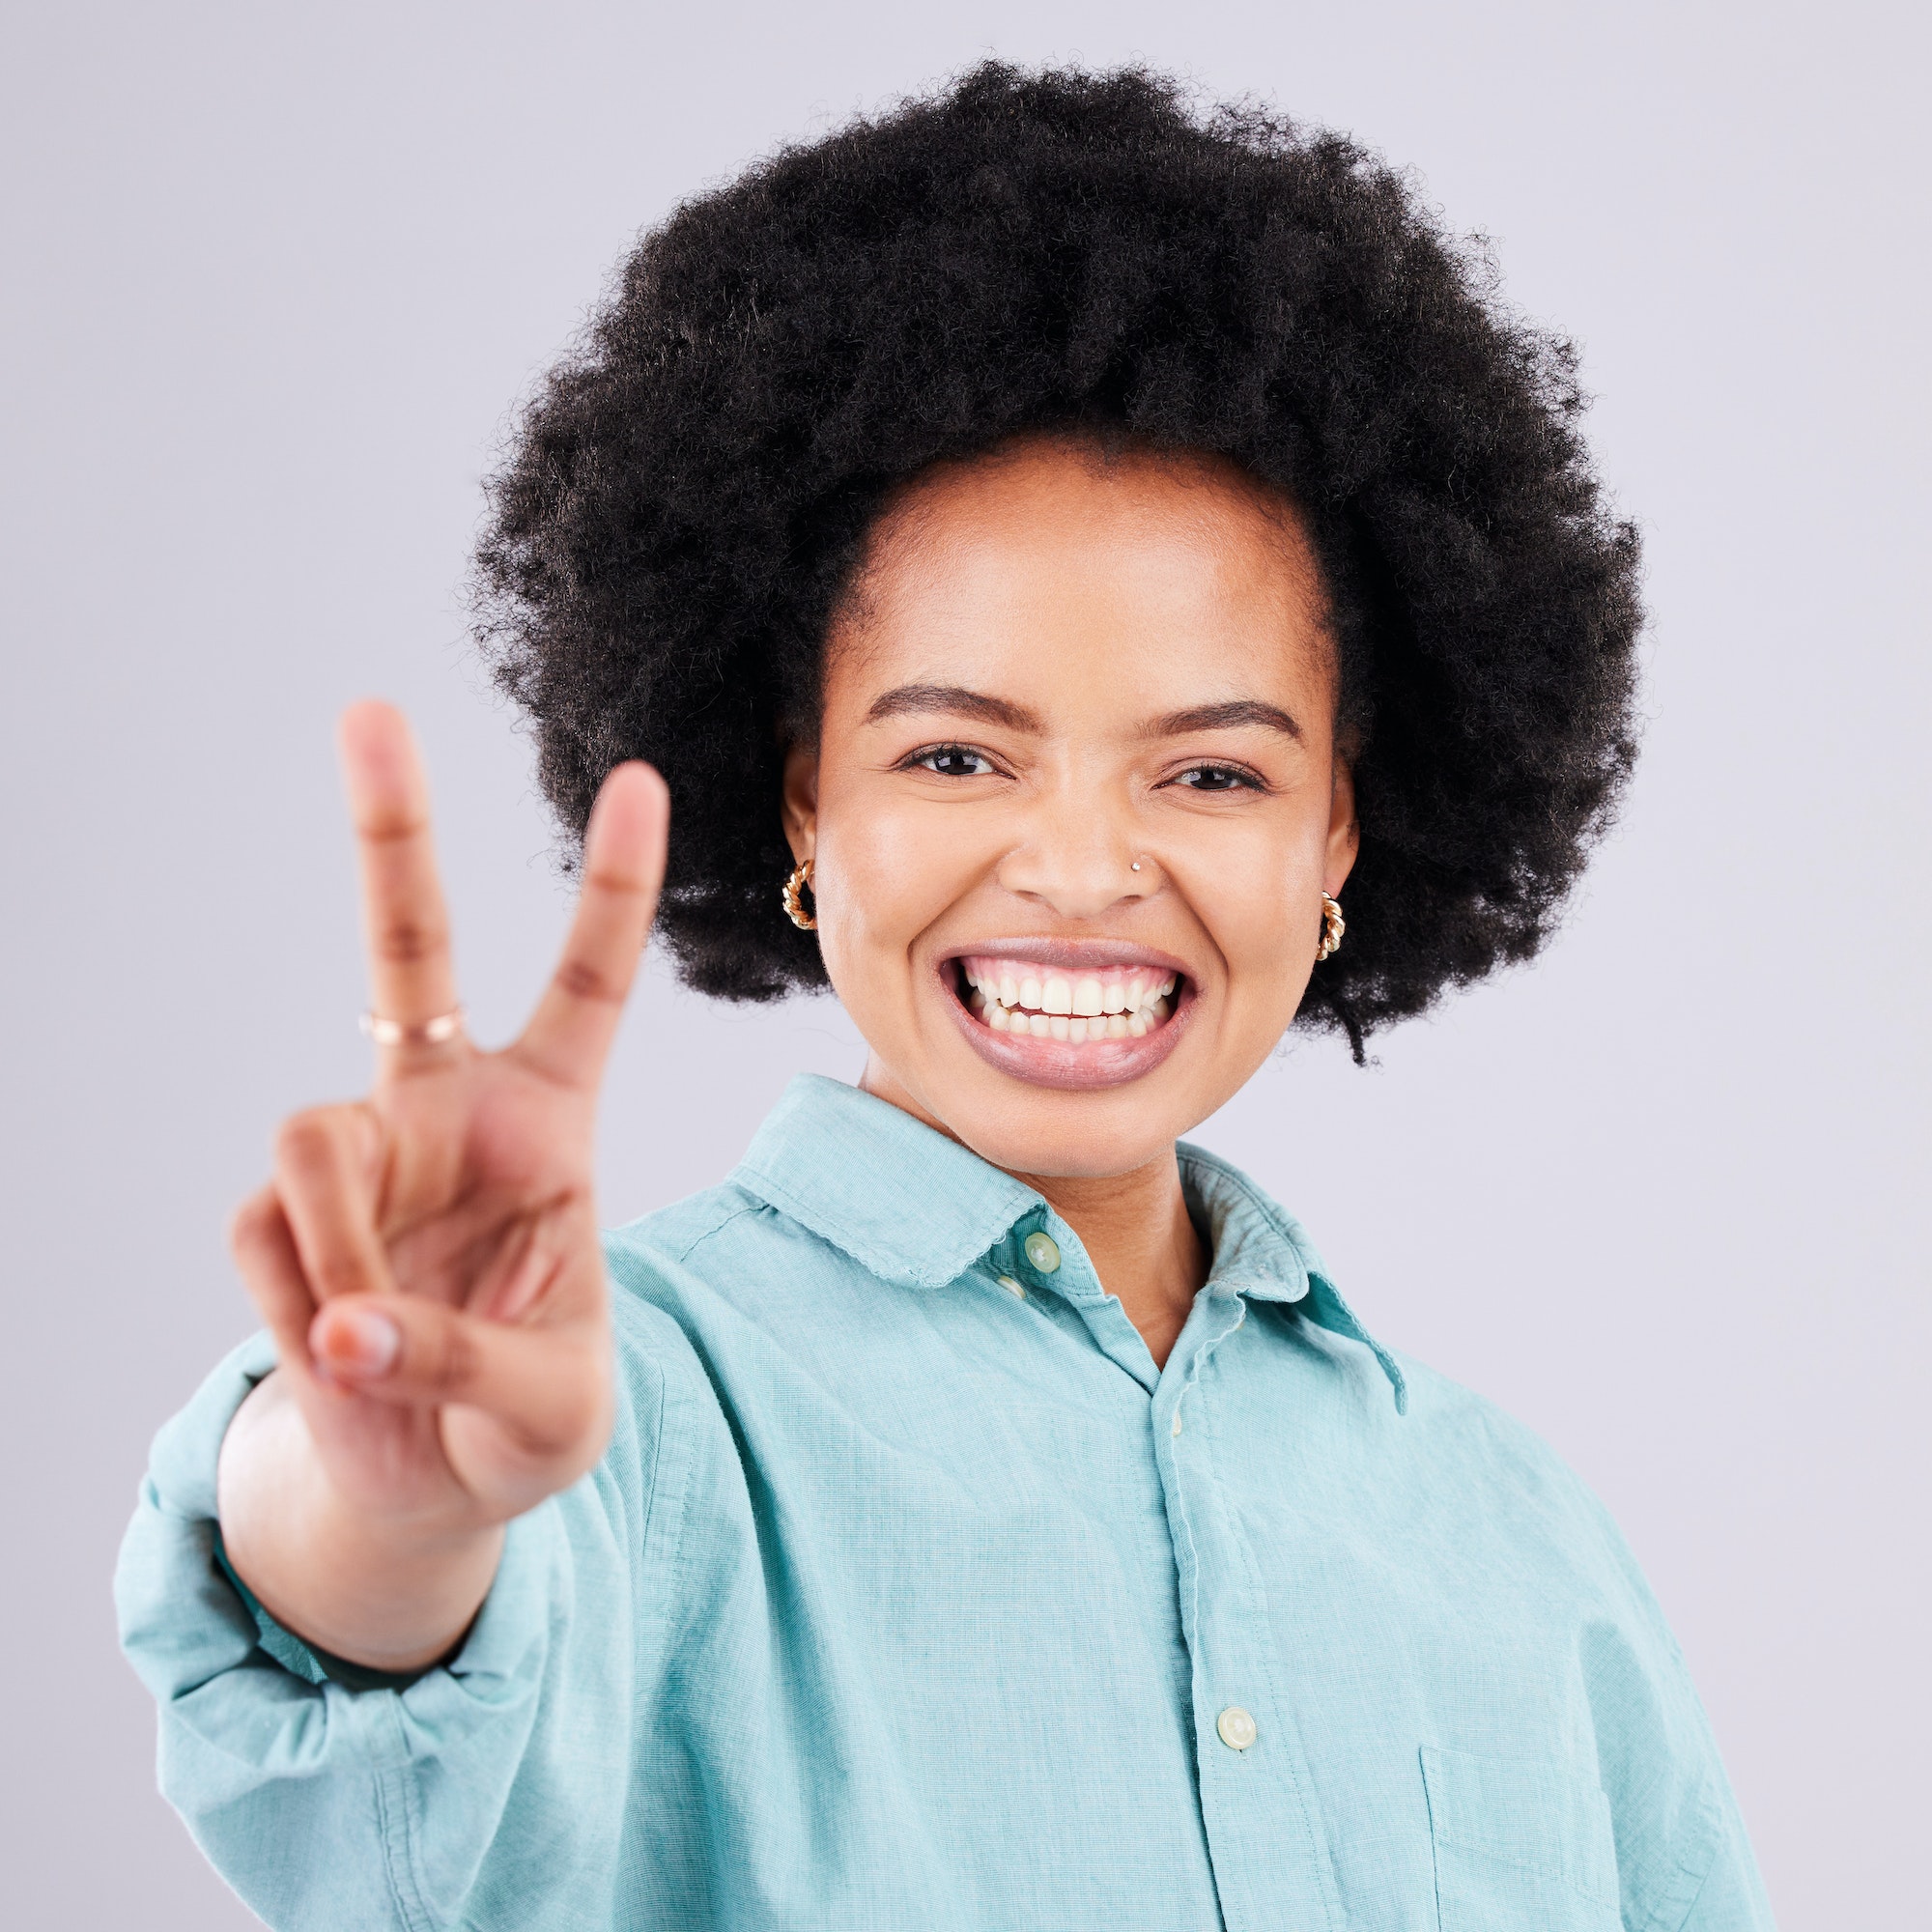 Smile, peace sign and portrait of black woman in studio for positive, agreement and support. Confid